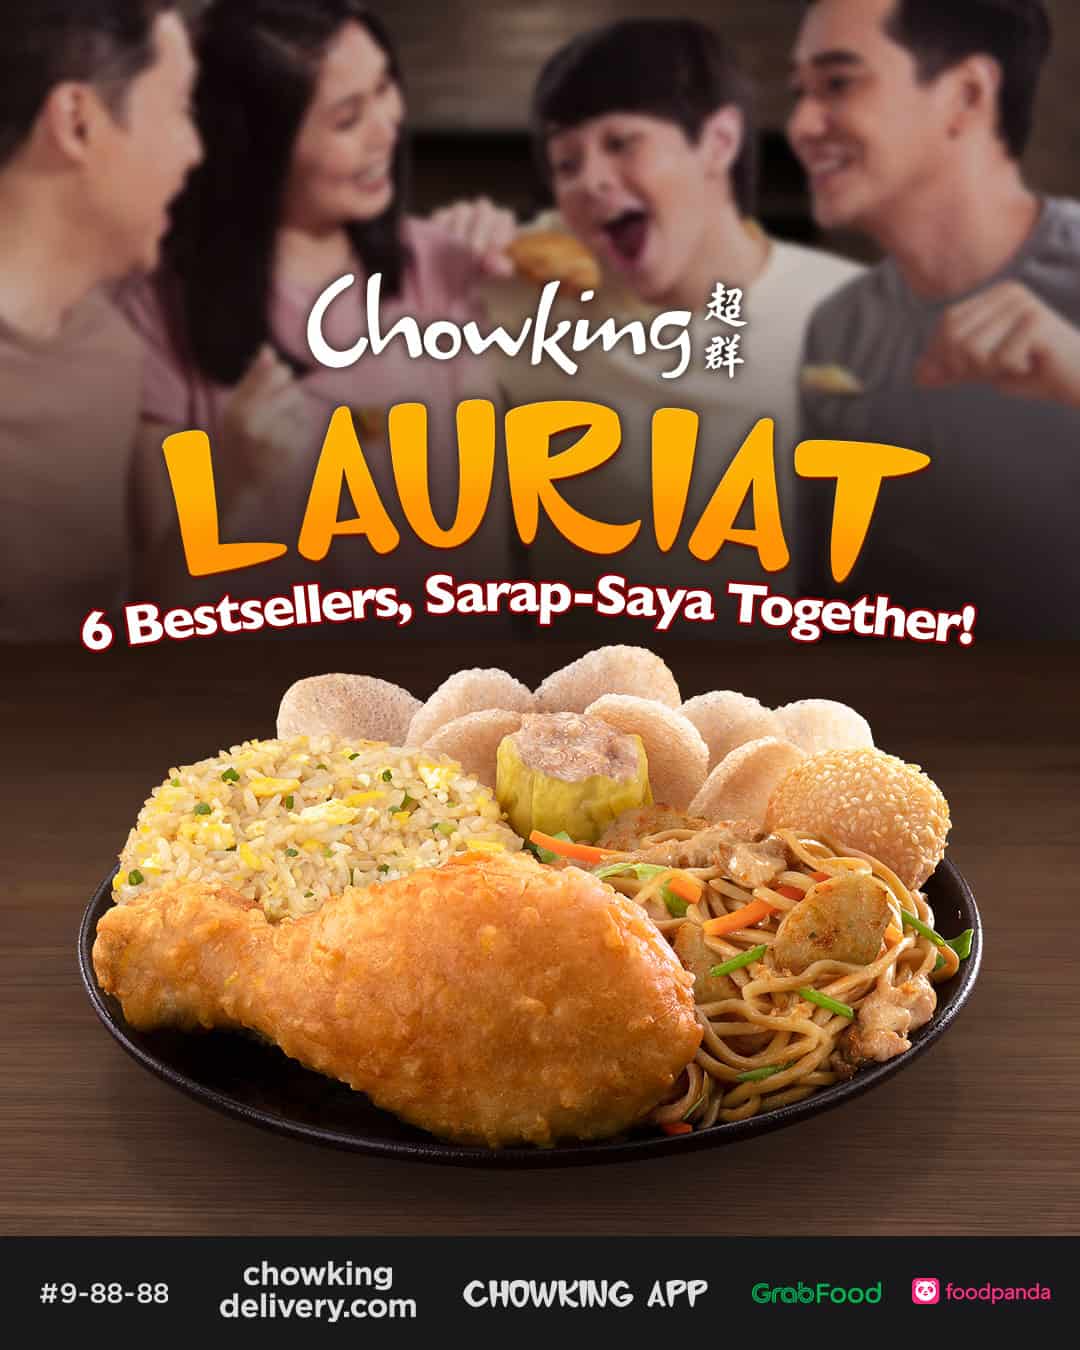 Delicious Lauriat on Chowking Menu Philippines